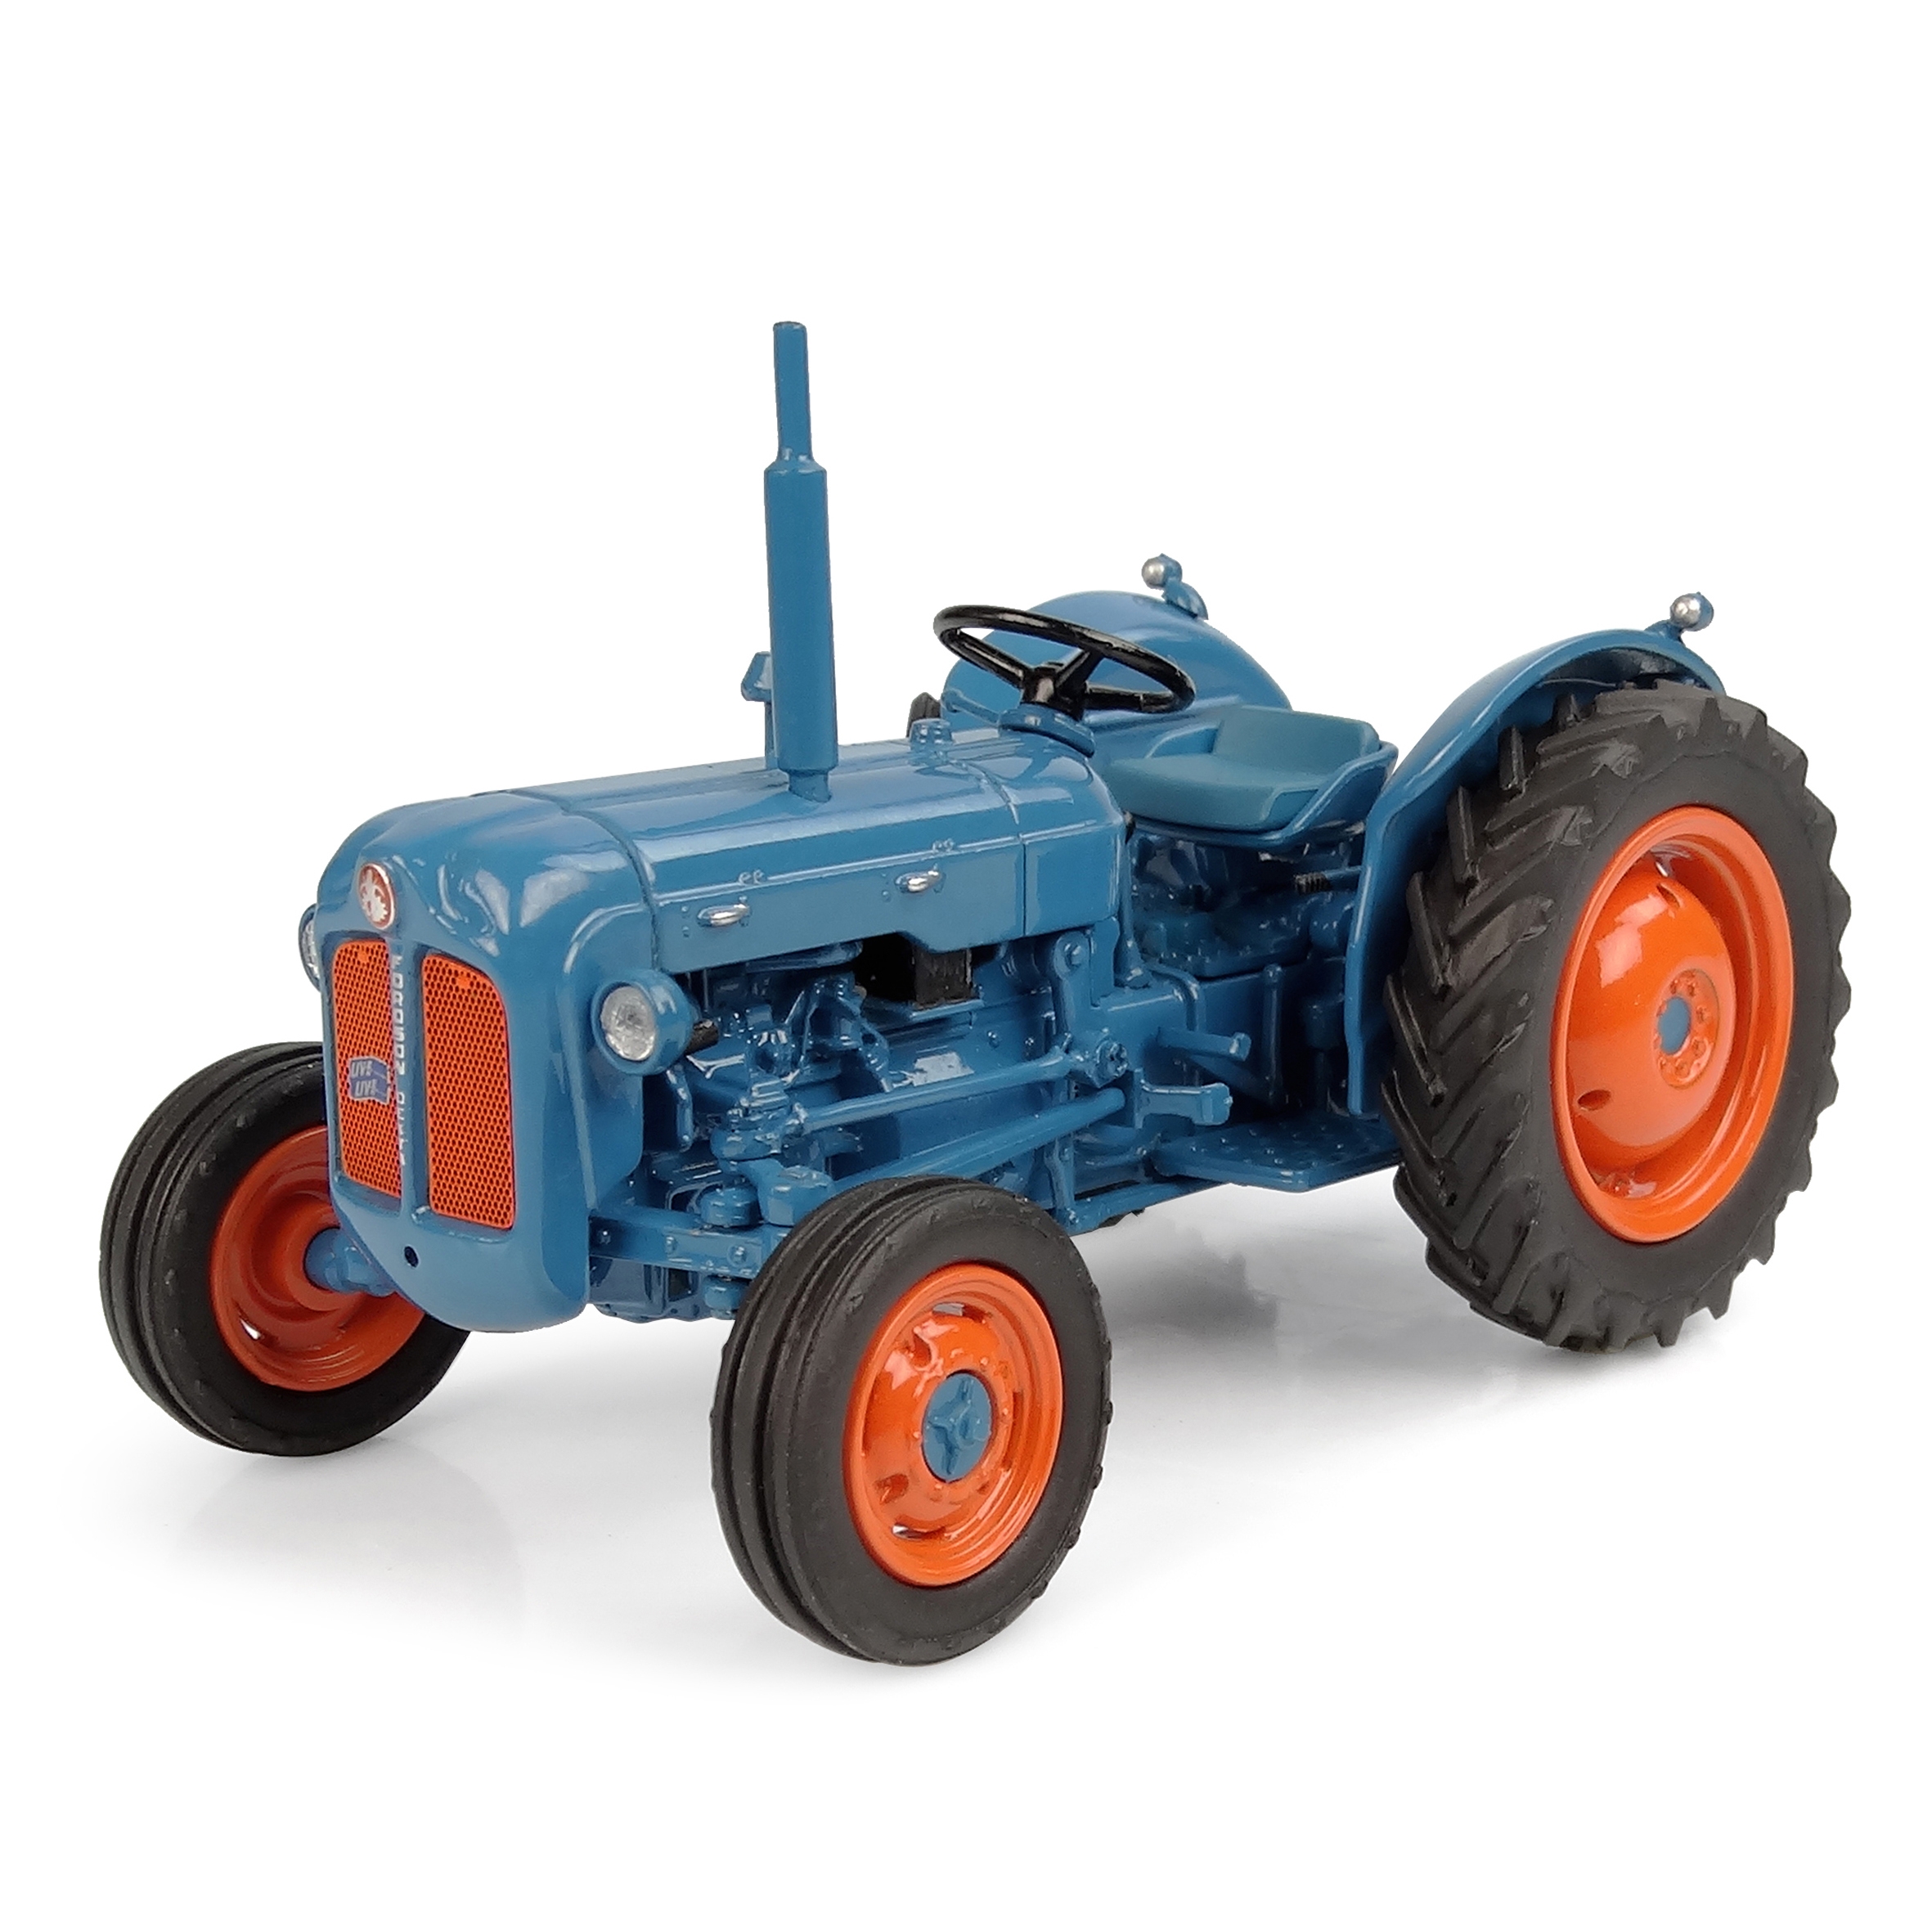 1962 Fordson Super Dexta Tractor Blue 1/32 Diecast Model By